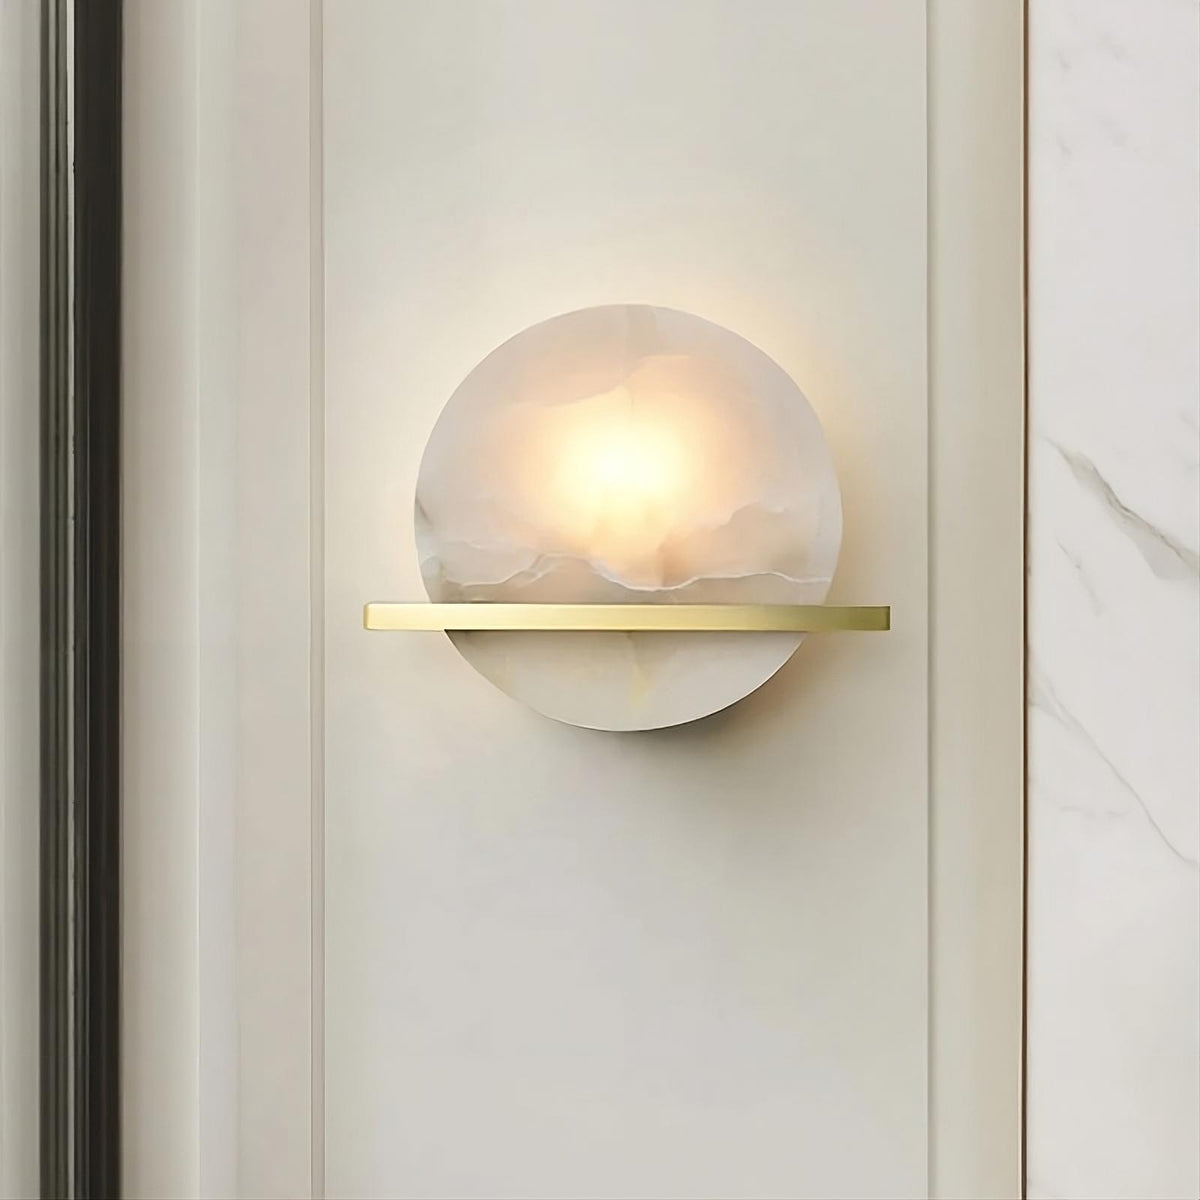 The Morsale.com Natural Marble Wall Light Sconce with a spherical, frosted glass shade diffuses warm light from its LED light source. Mounted on a vertical panel with a horizontal brass accent, it adds a sleek touch. The surrounding light-colored wall features subtle veining, enhancing the minimalist design.